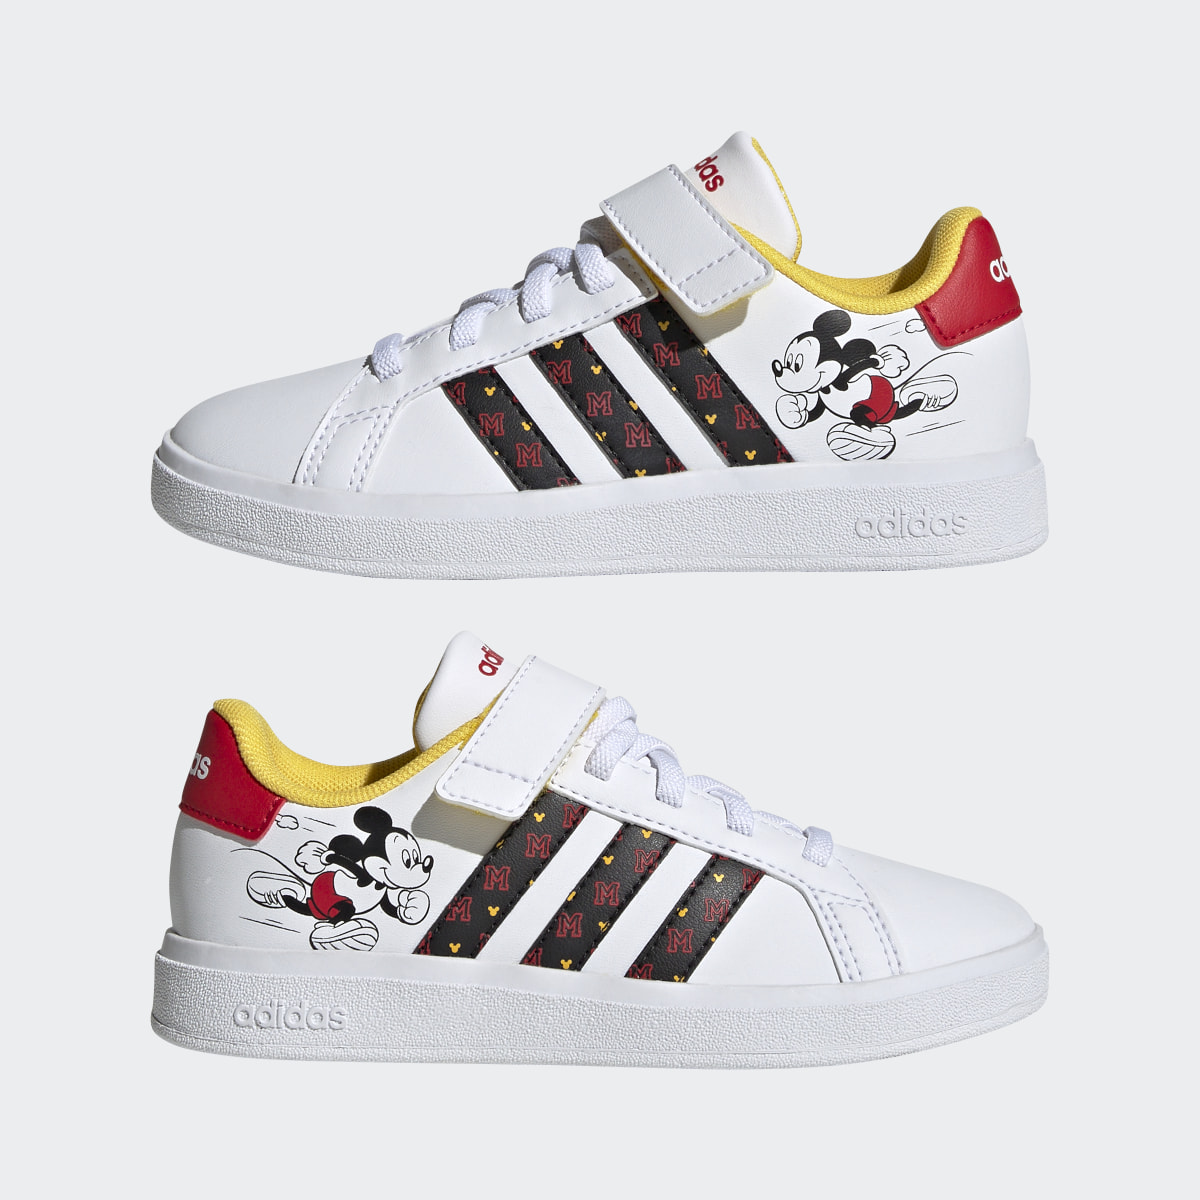 Adidas x Disney Grand Court Micky Hook-and-Loop Schuh. 8